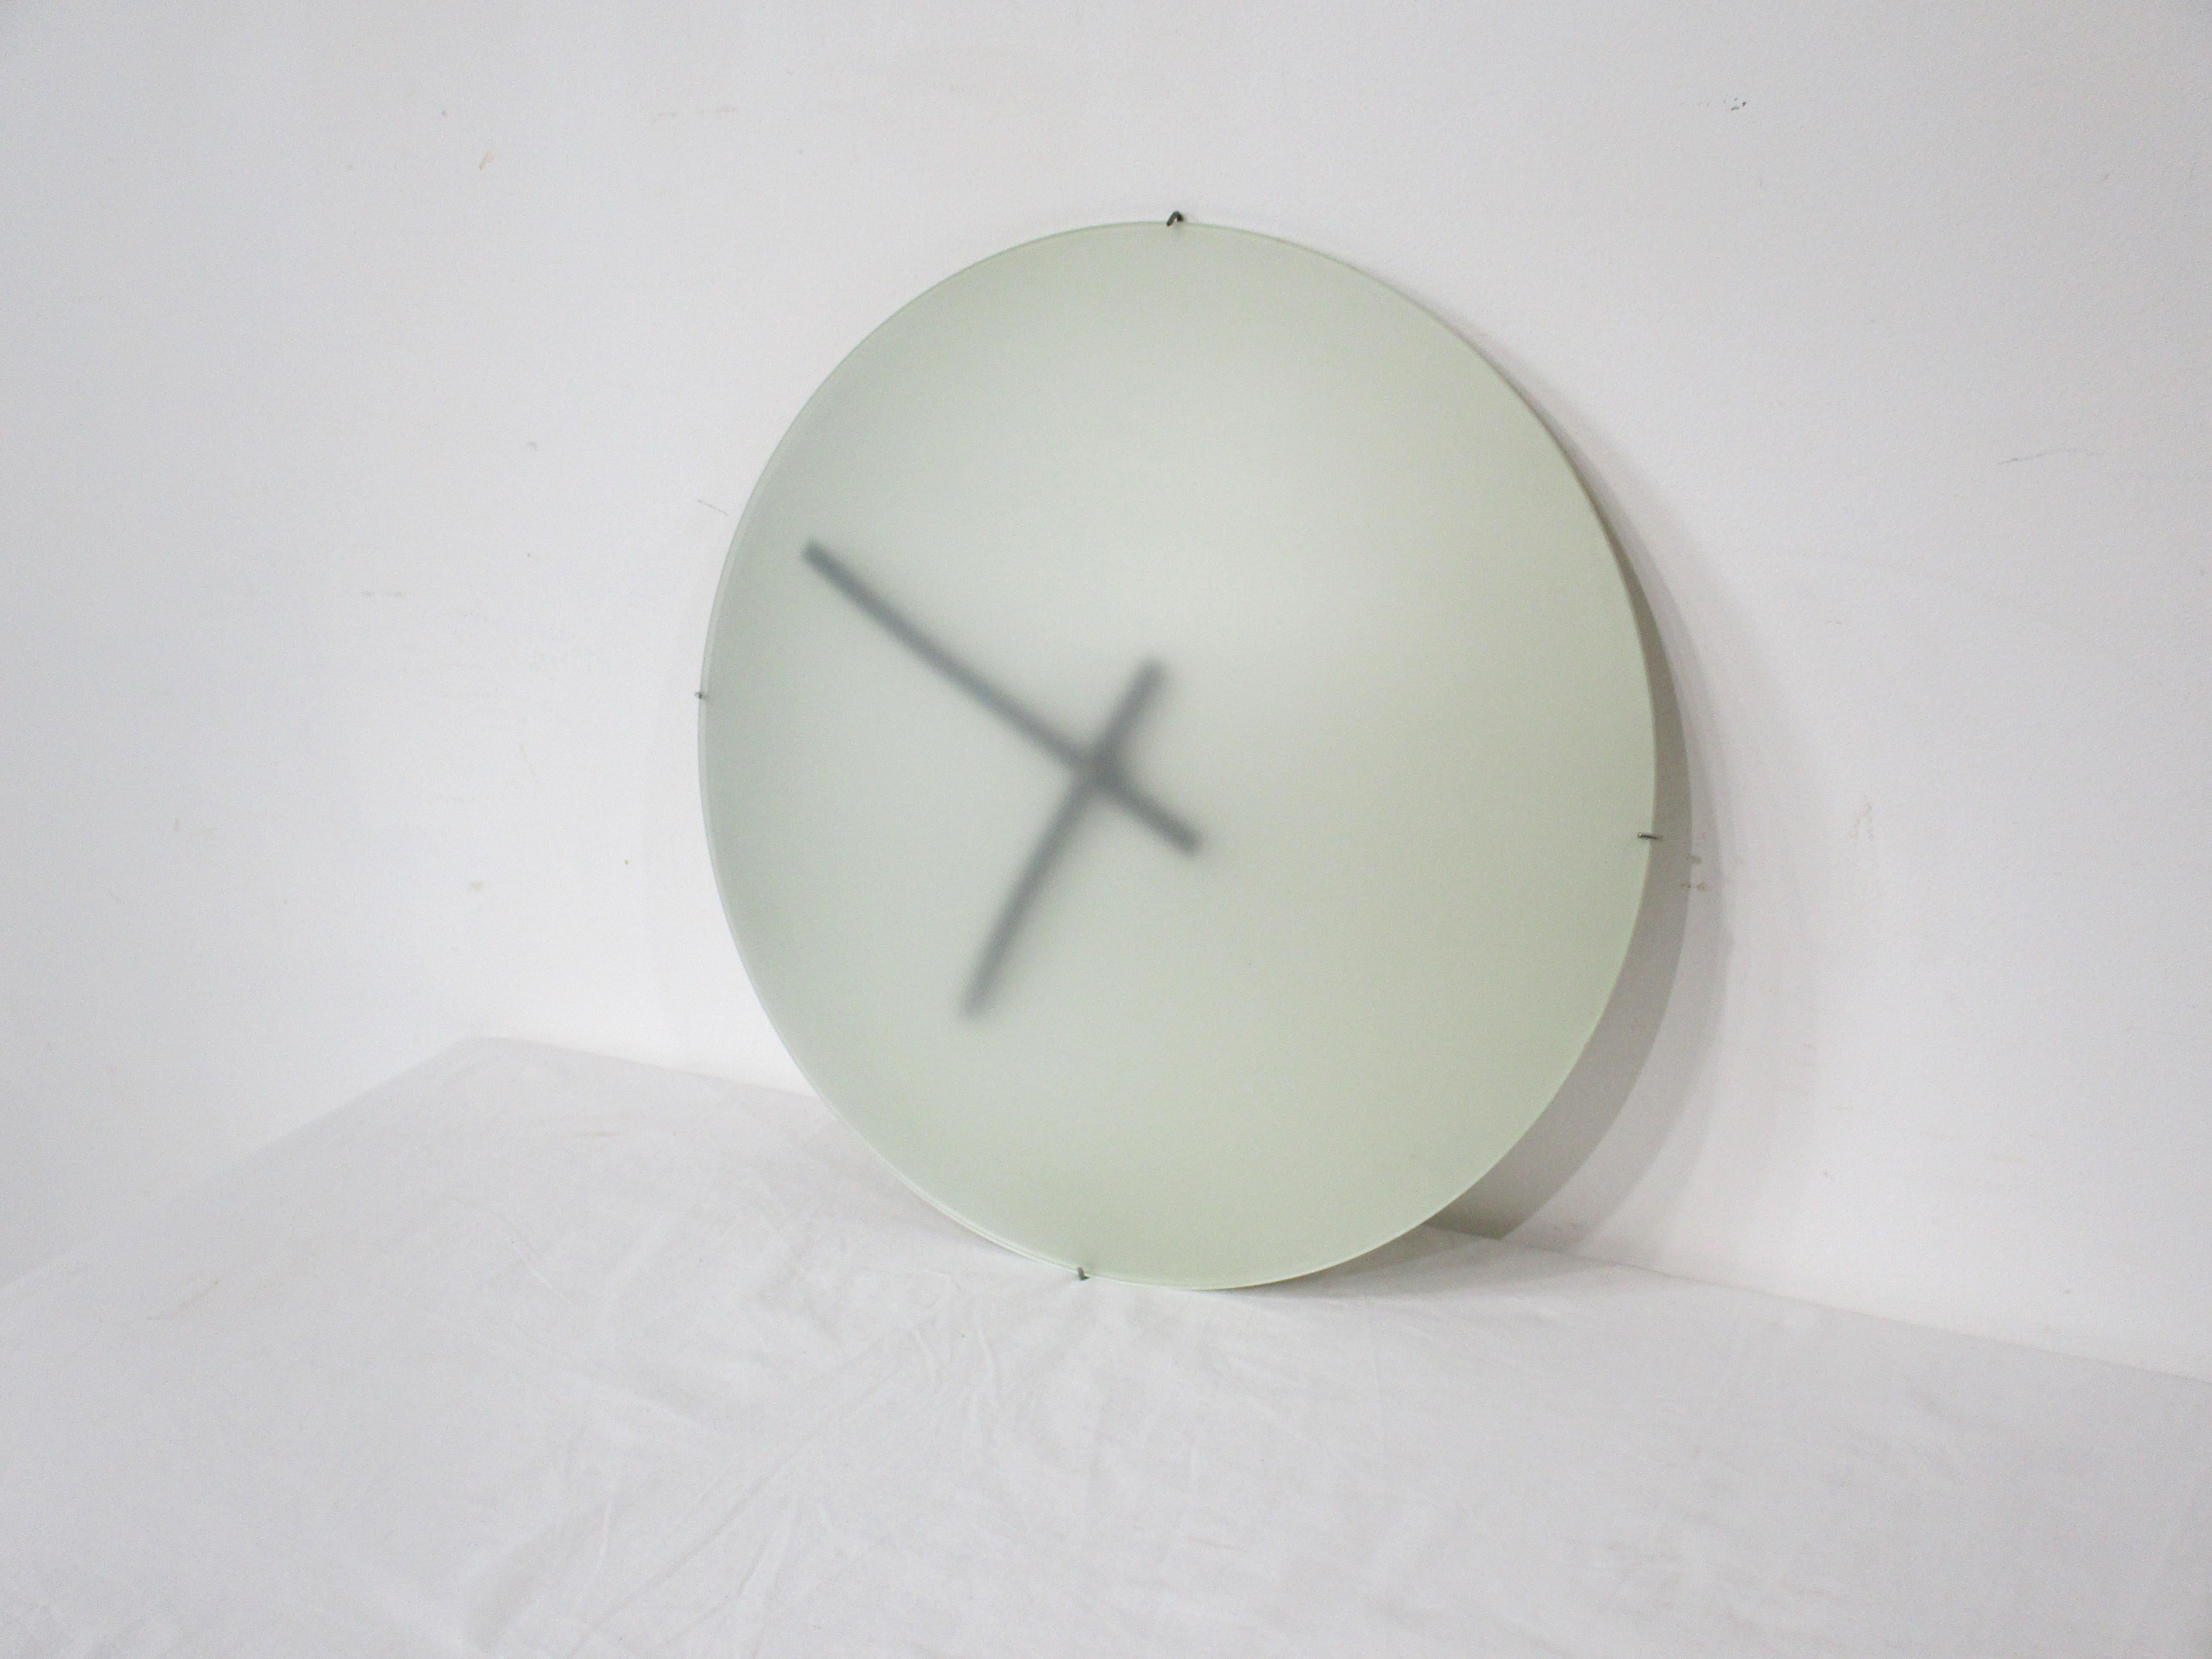 A Pop Art frosted glass domed faced wall clock with black hands designed in 1980 by Paul Schudel . This design resides in the collection of the MOMA museum featuring a spacy modern clean look . The clock works are battery operated and is functioning